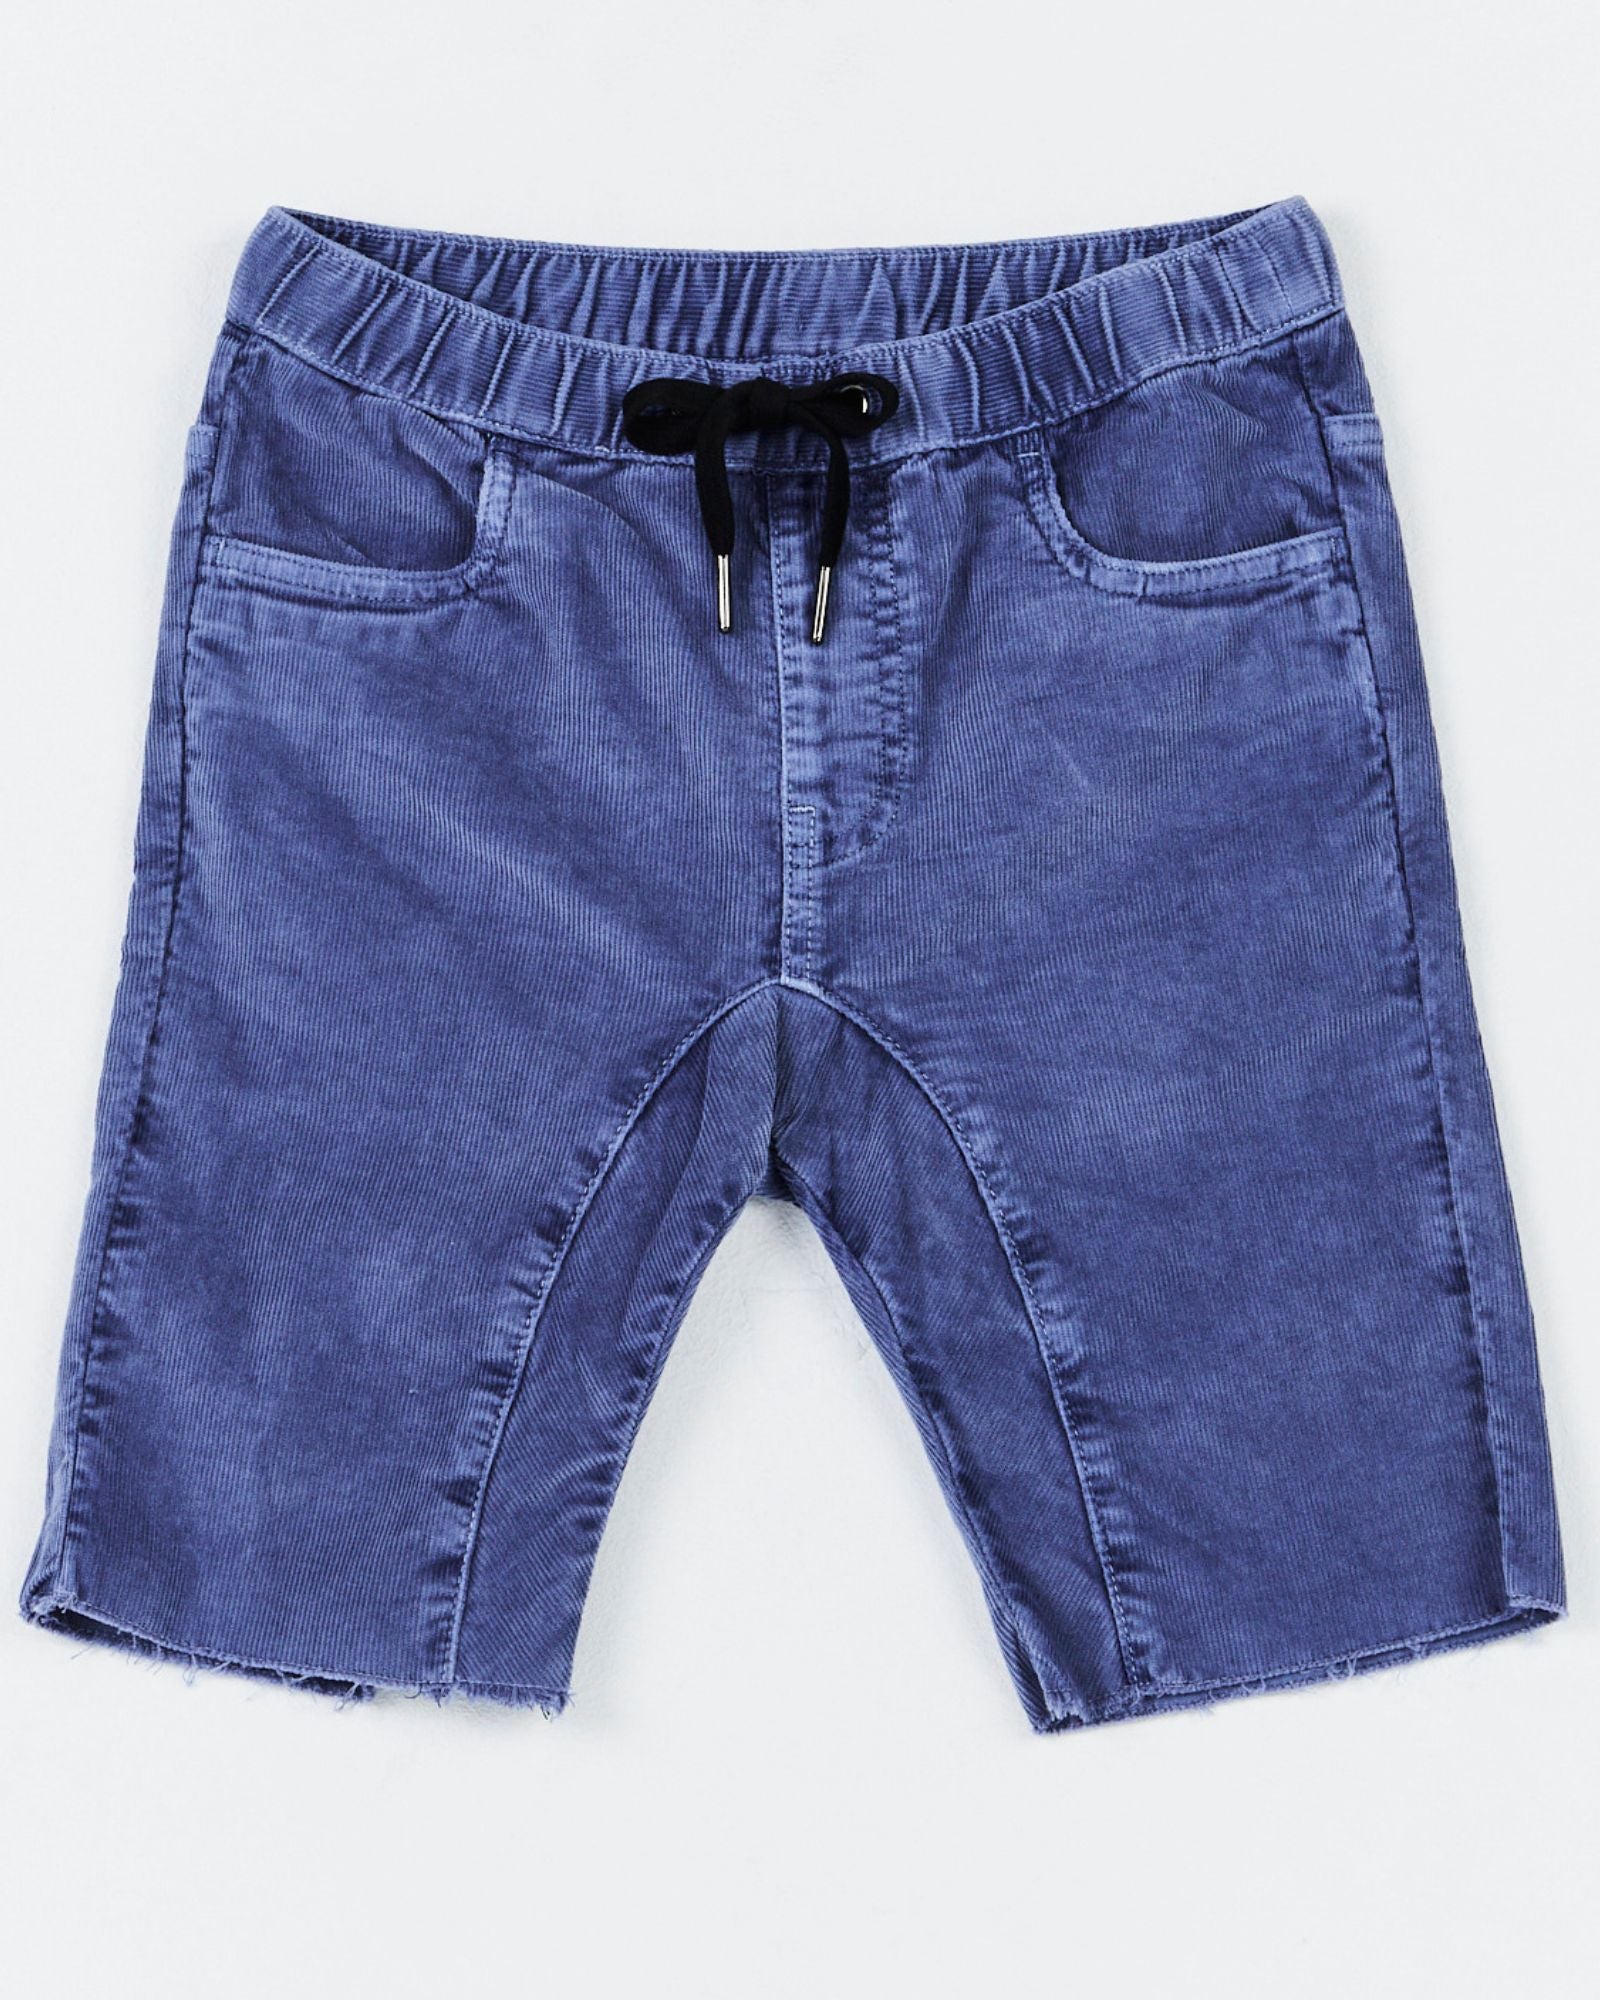 Alphabet Soup's Kids Trusty Cord Shorts for boys aged 2-7.  Crafted with cotton corduroy in blue enzyme wash with stretch, including adjustable waist, raw hem, faux fly, hip & back pockets with bolt embroidery.